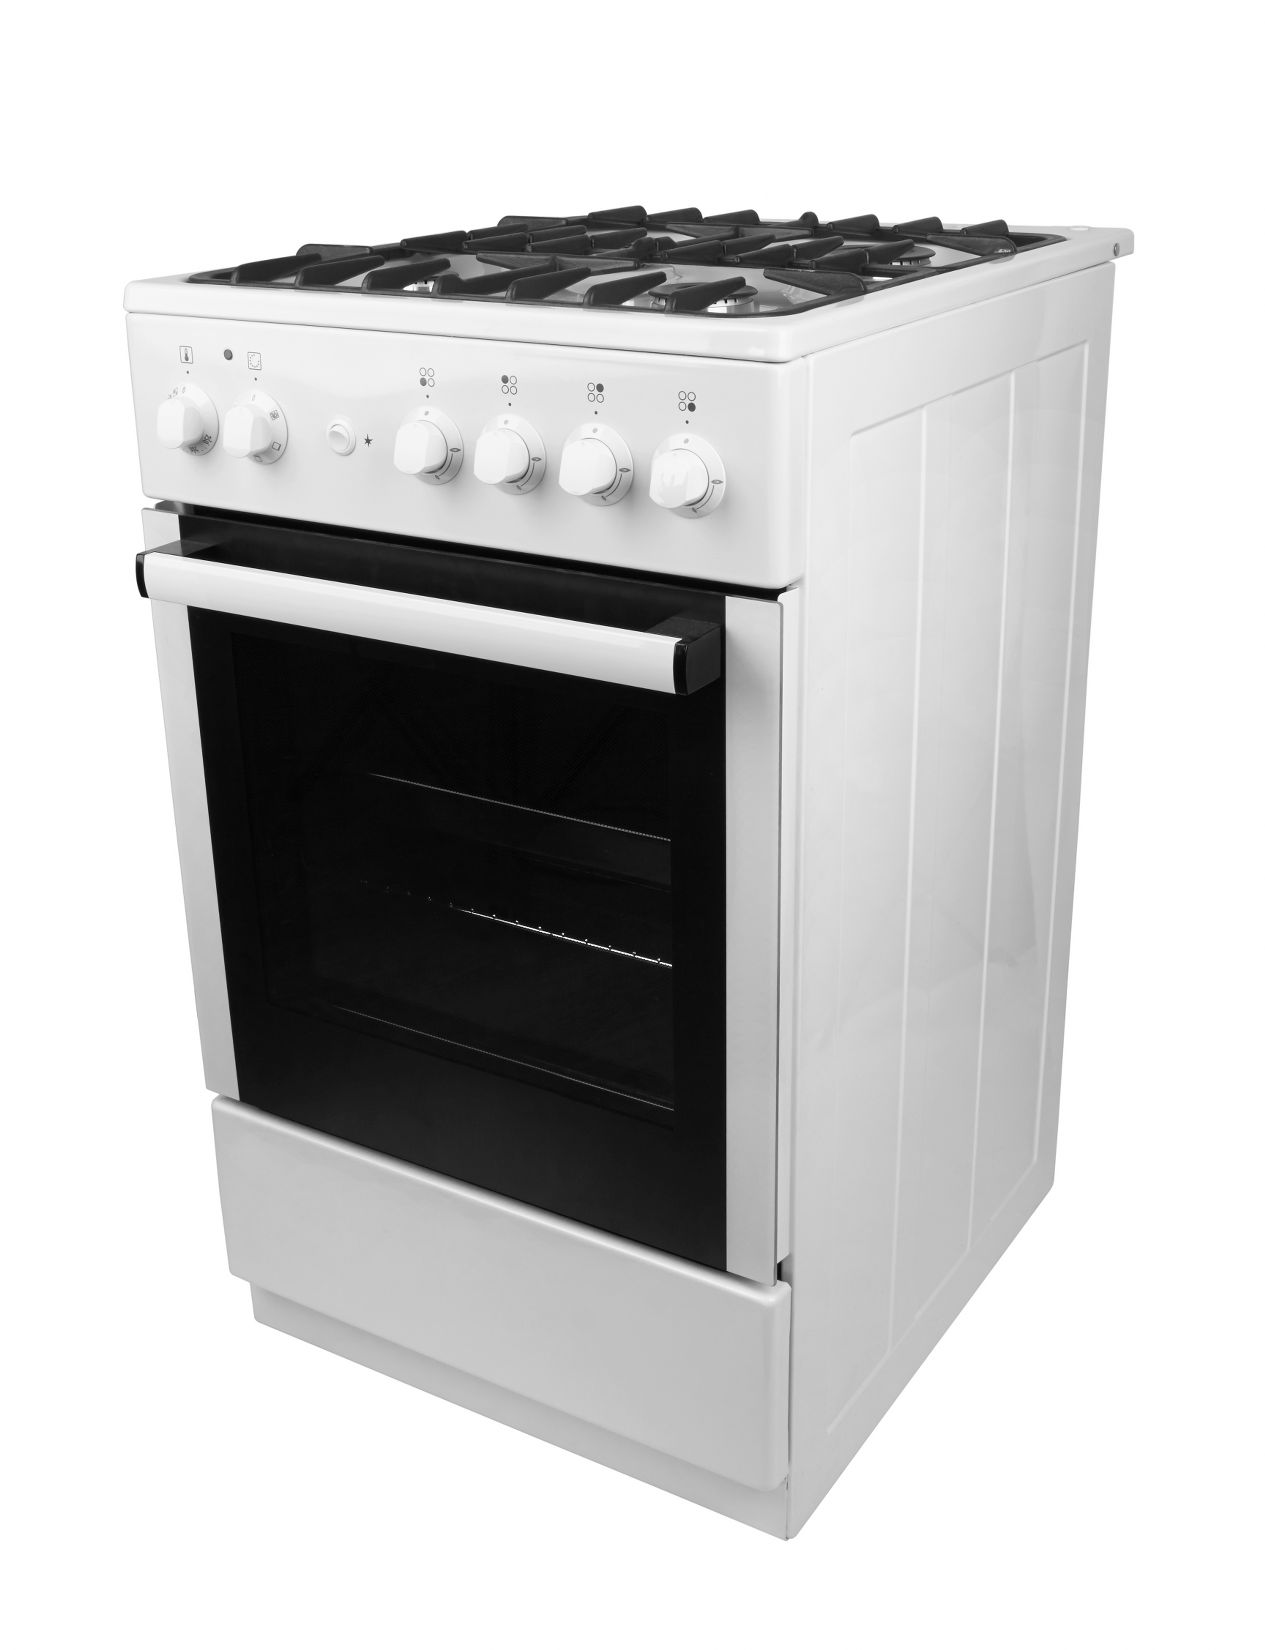 Gas stove isolated on a white background